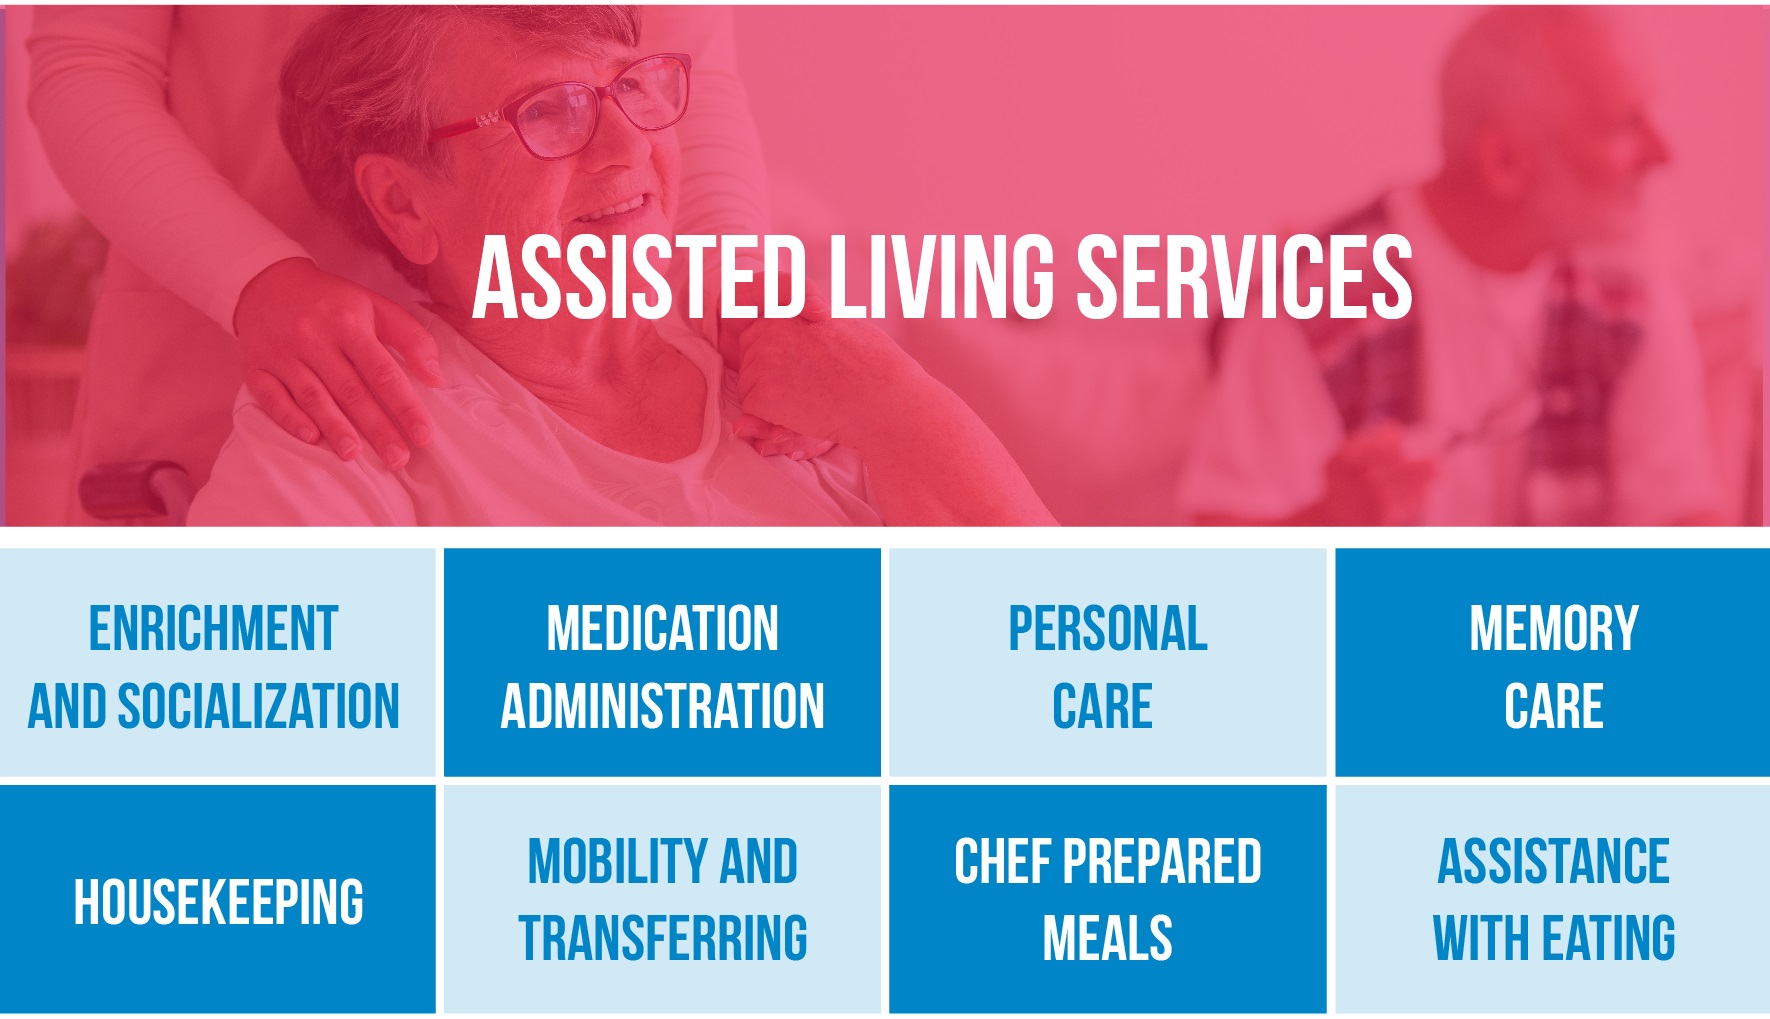 Life enrichment and socialization activities

Medication administration

Personal care (bathing, dressing, grooming, bathroom/toileting)

Memory care

Housekeeping

Mobility and transferring

Chef-prepared meals

Assistance with eating